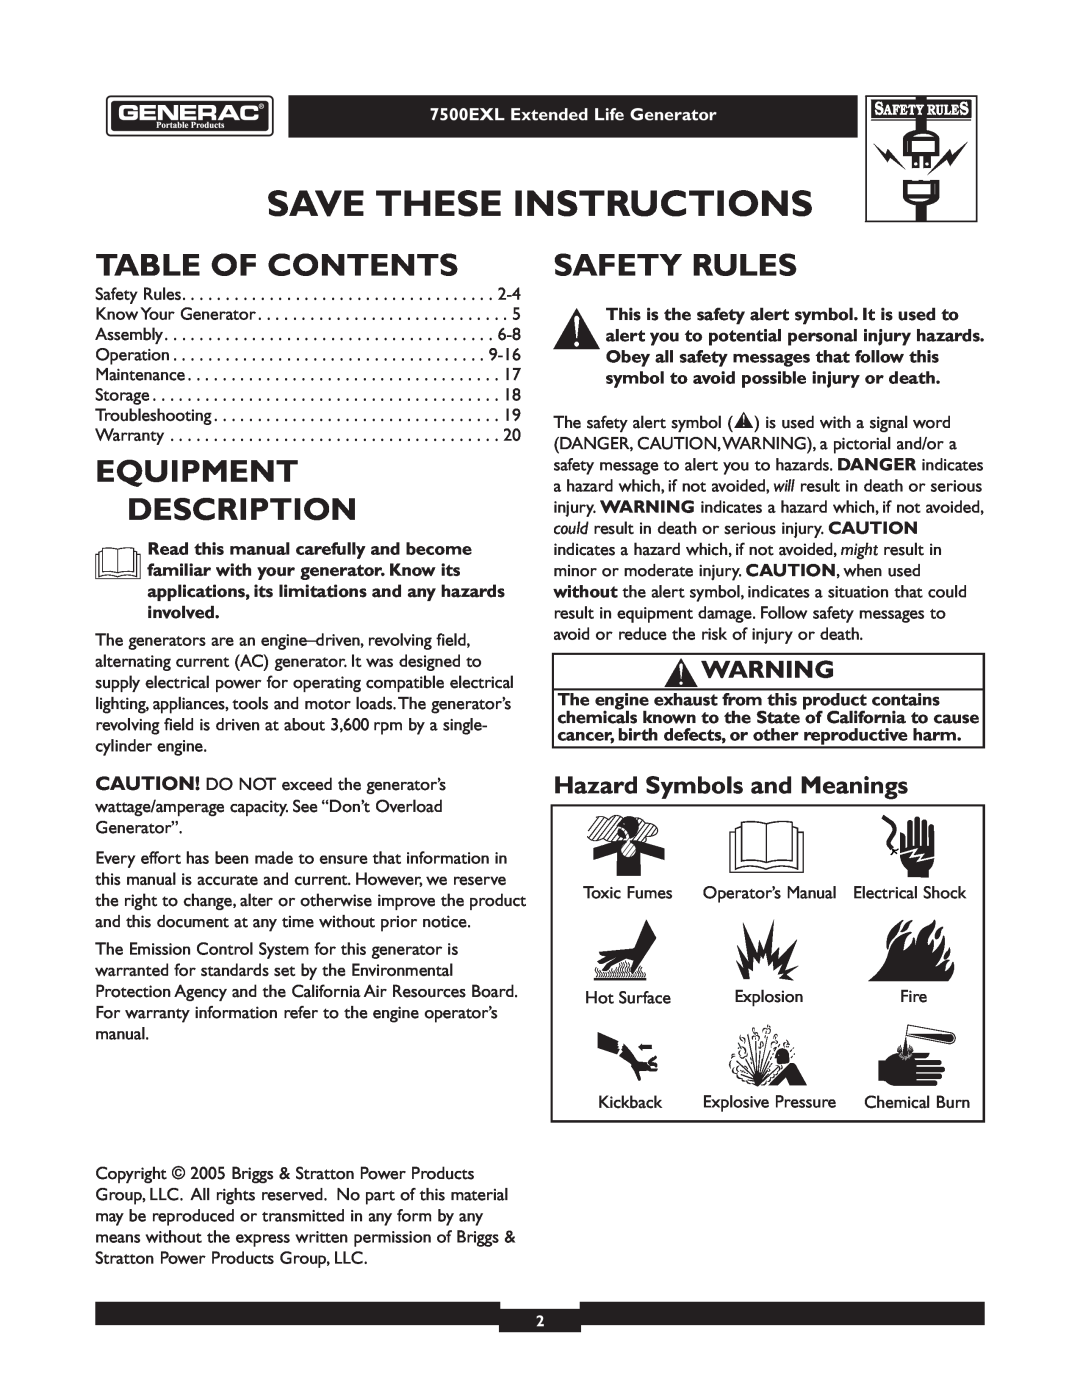 Generac 101 9-3 operating instructions Table Of Contents, Equipment Description, Safety Rules, Hazard Symbols and Meanings 